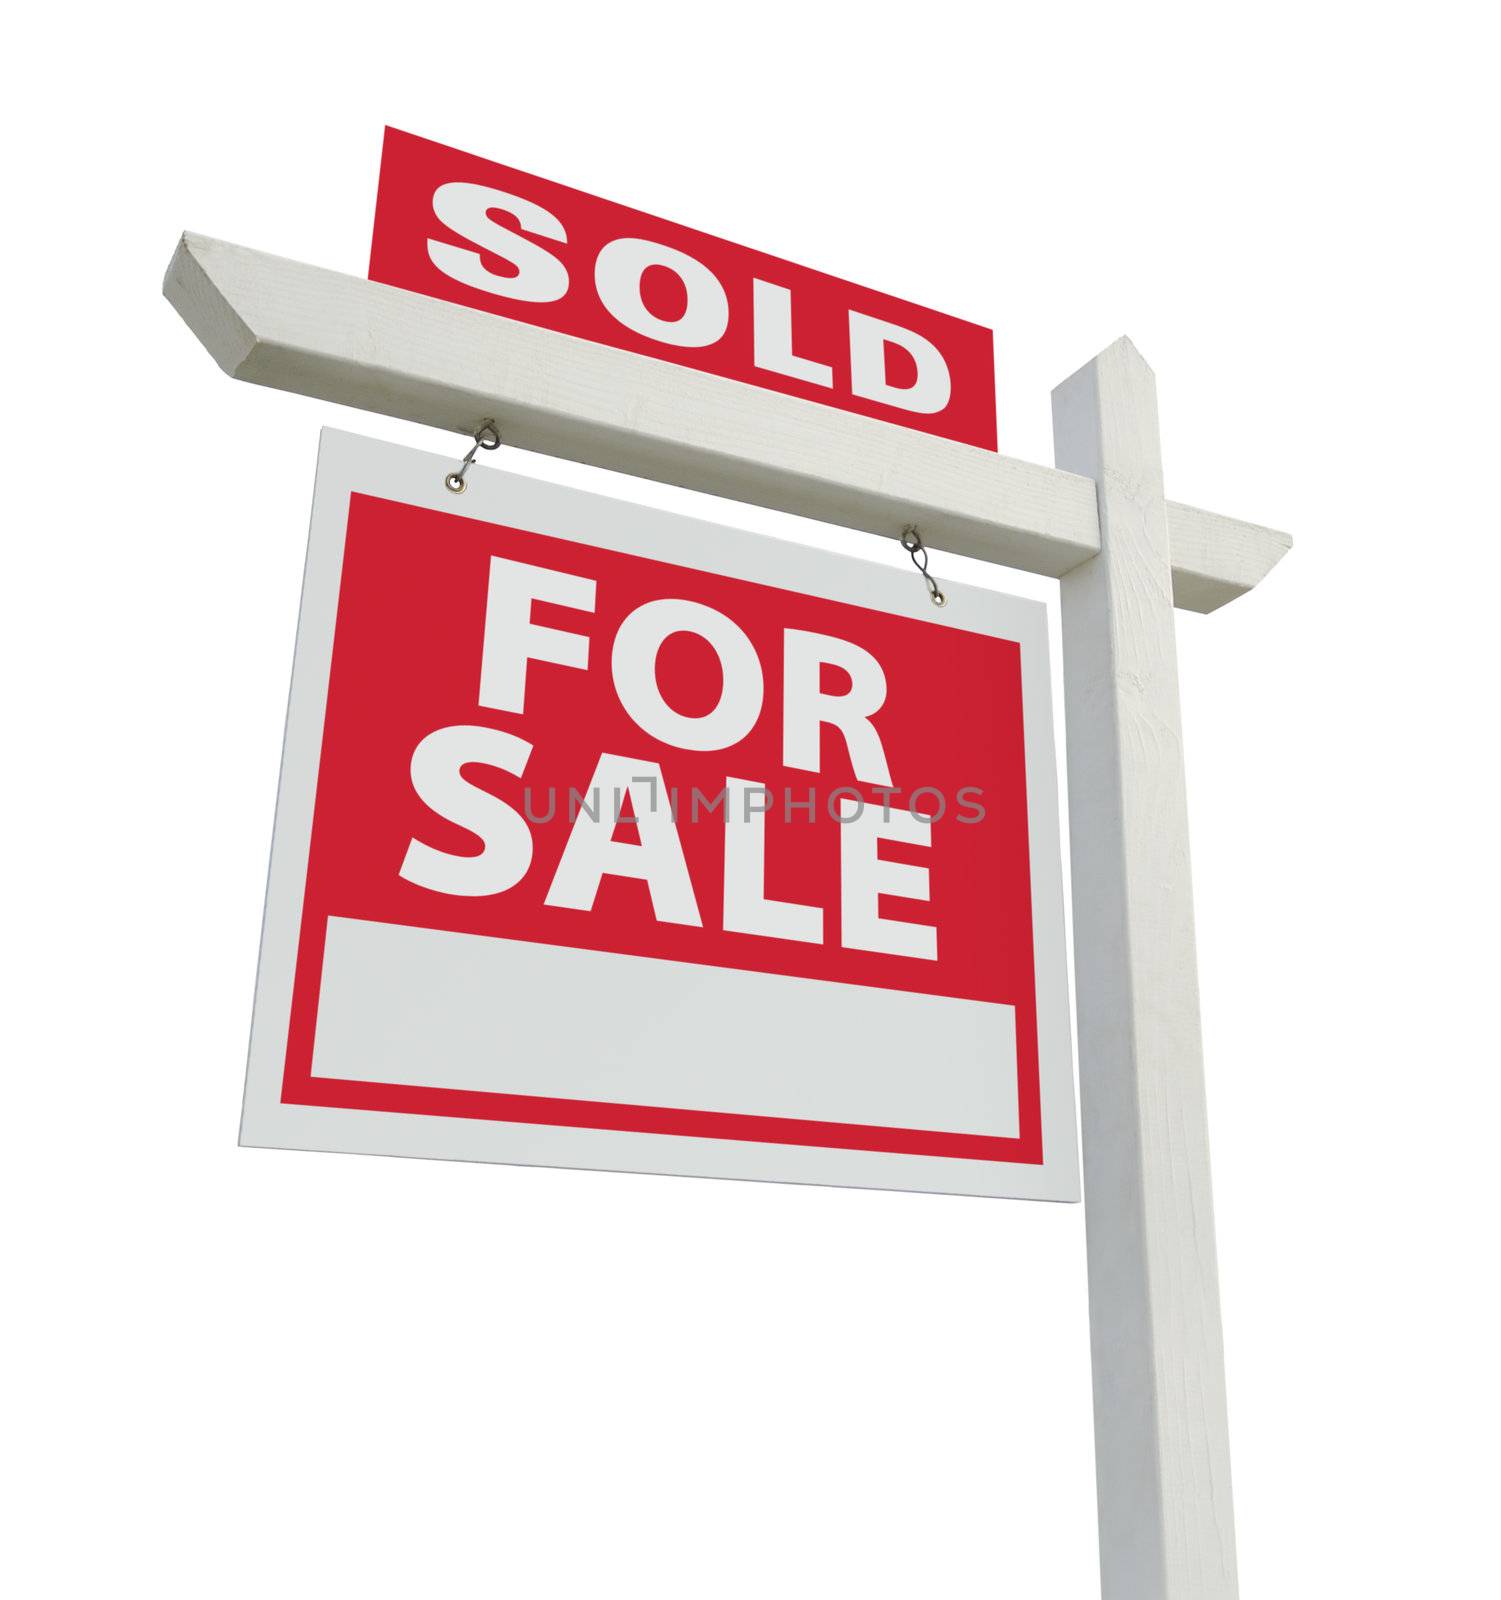 Sold For Sale Real Estate Sign by Feverpitched